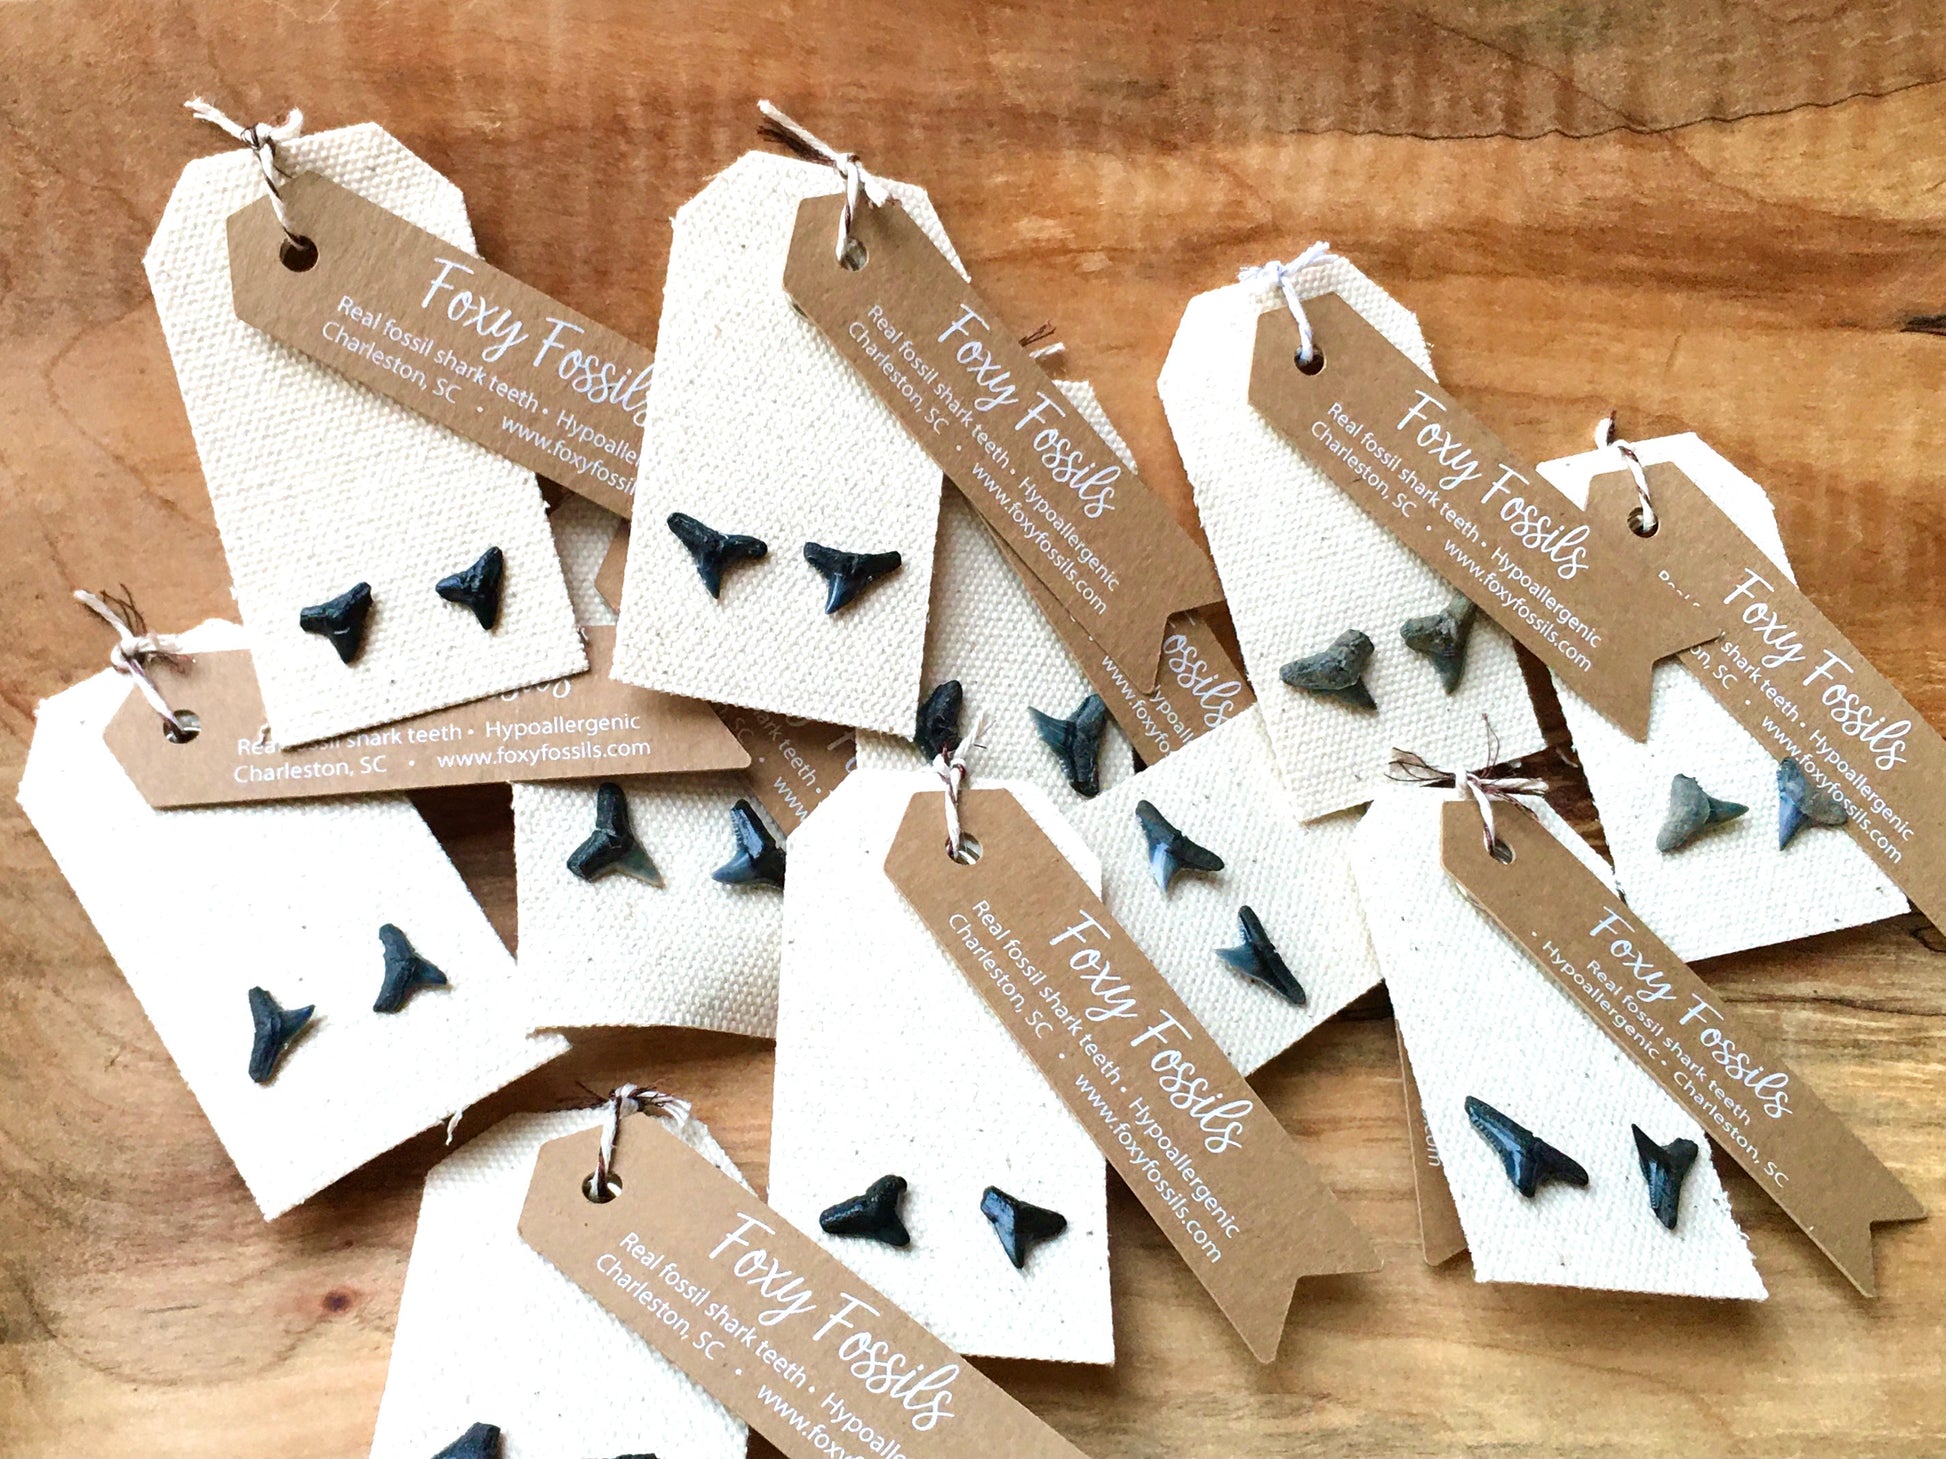 sustainable and ethical prehistoric fossilized shark tooth stud earrings-group shot- Foxy Fossils 